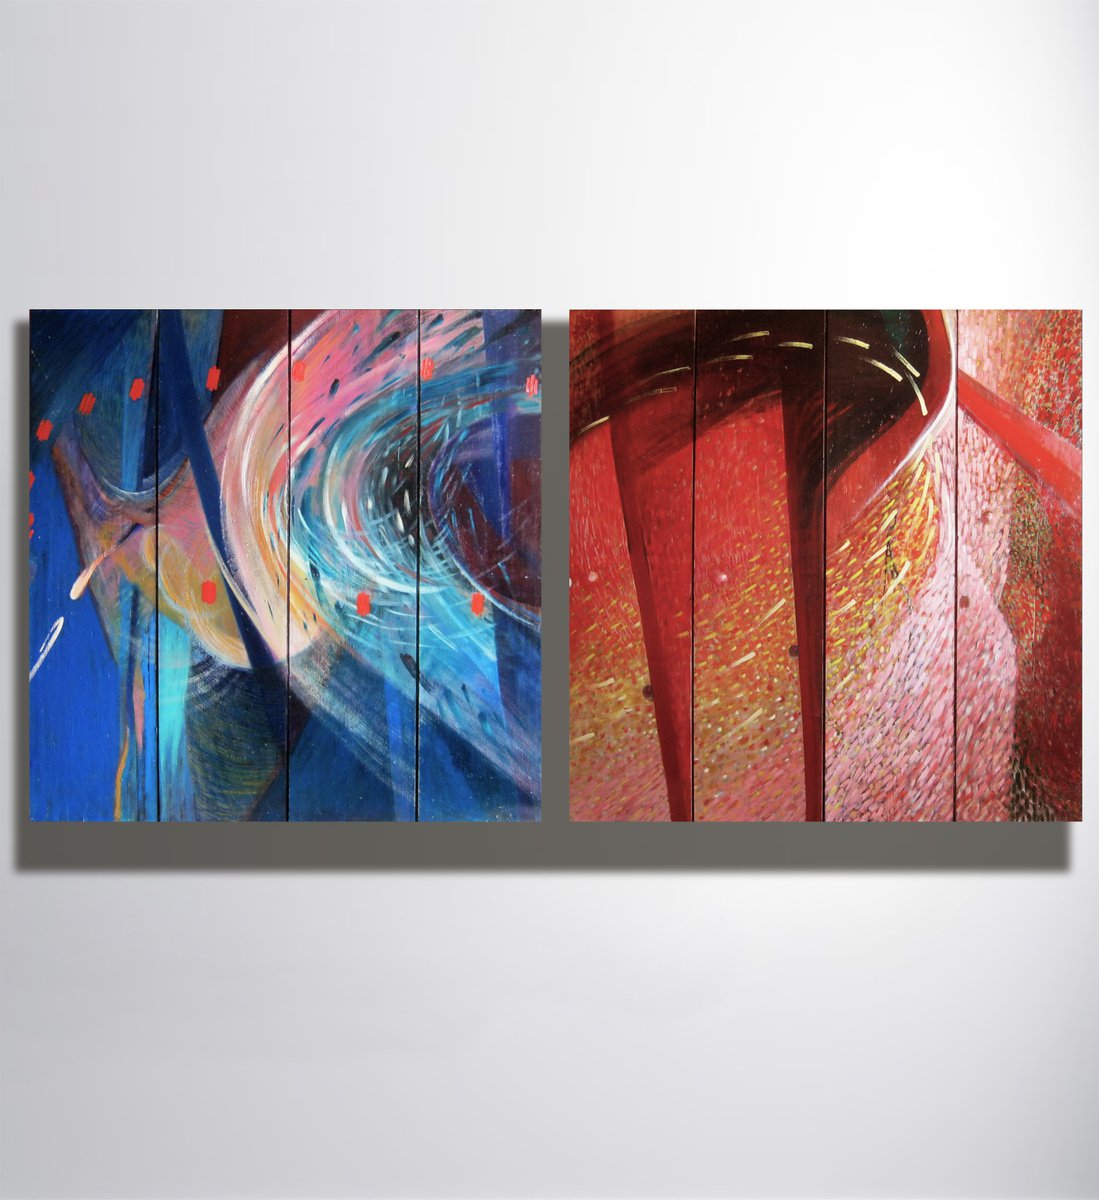 Blue + Red diptych by Marya Matienko